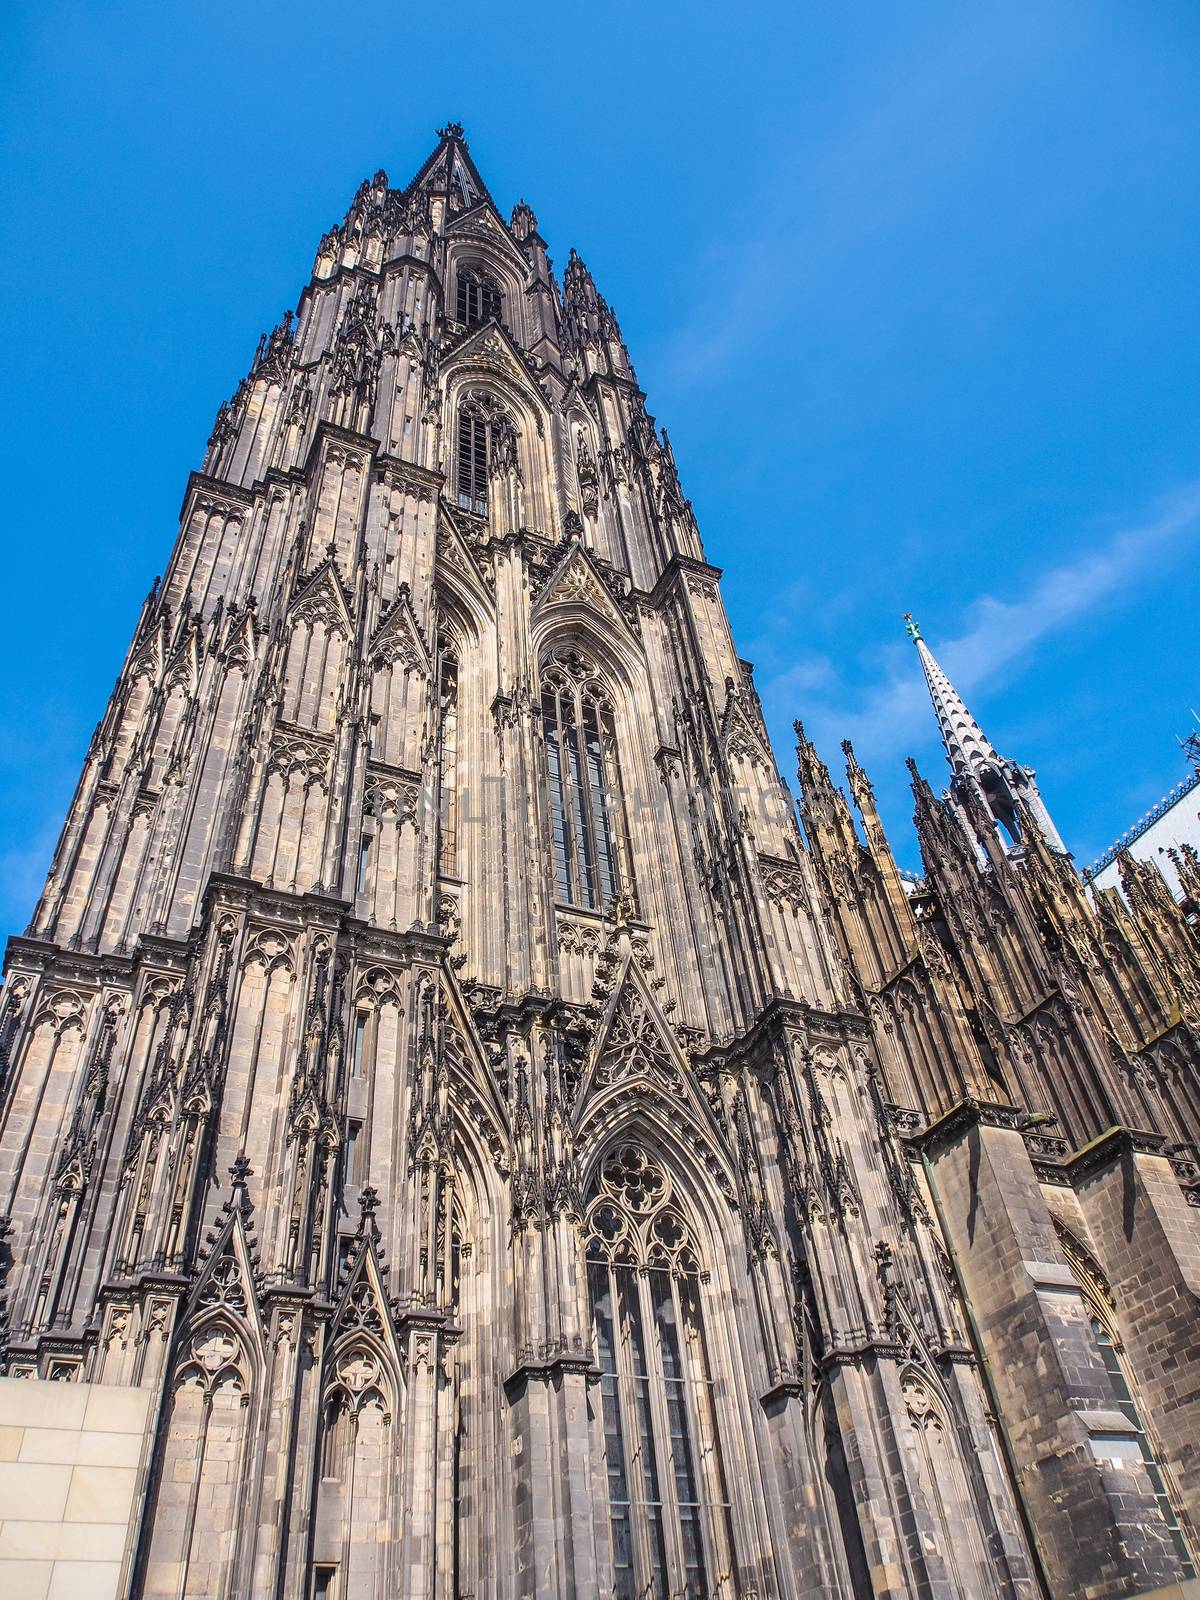 Cologne Cathedral, monument of German Catholicism and Gothic architecture in Cologne, Germany.